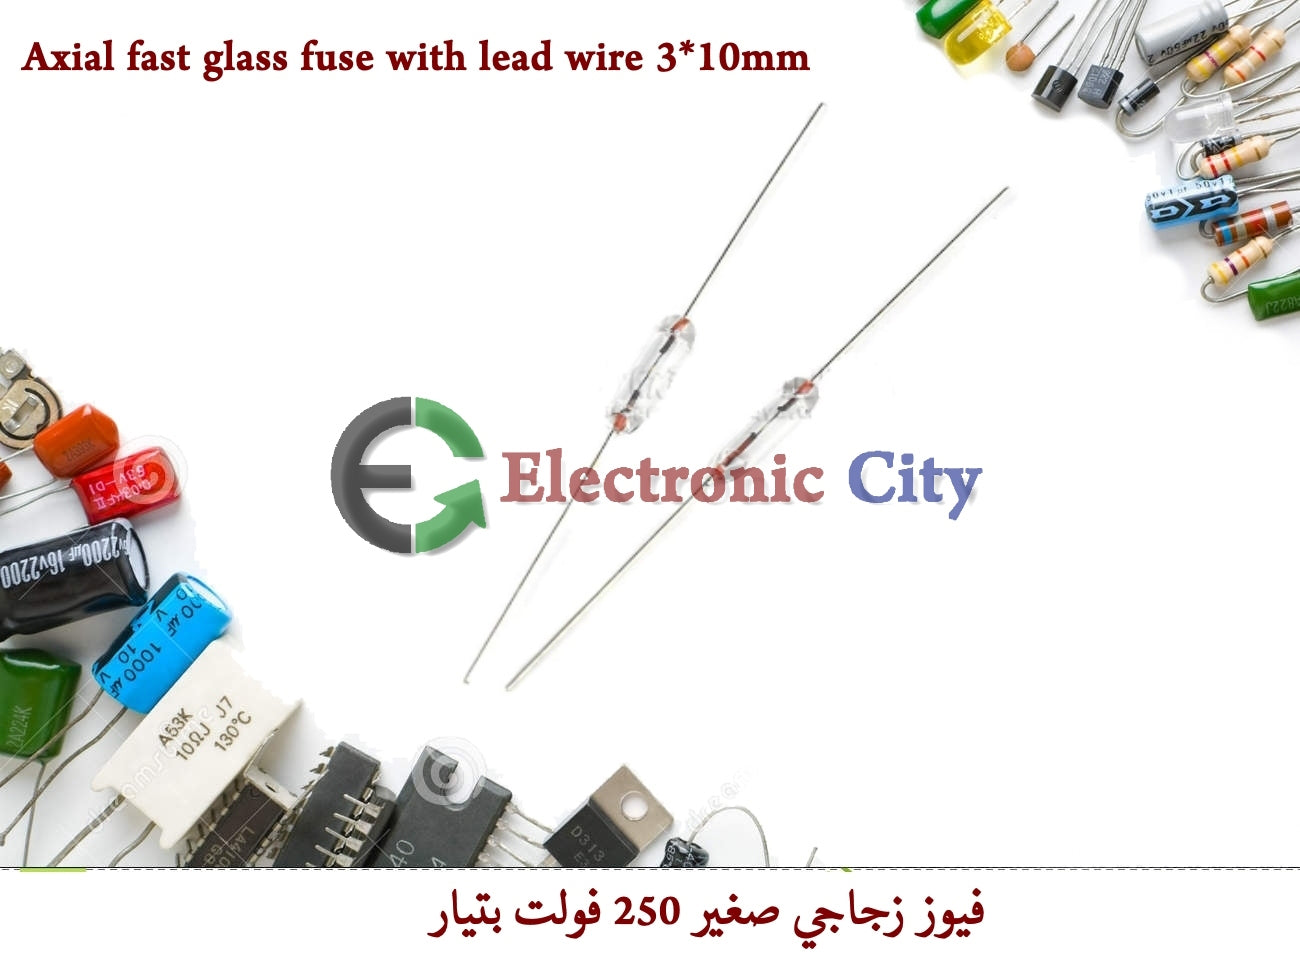 Axial fast glass fuse with lead wire 3X10mm